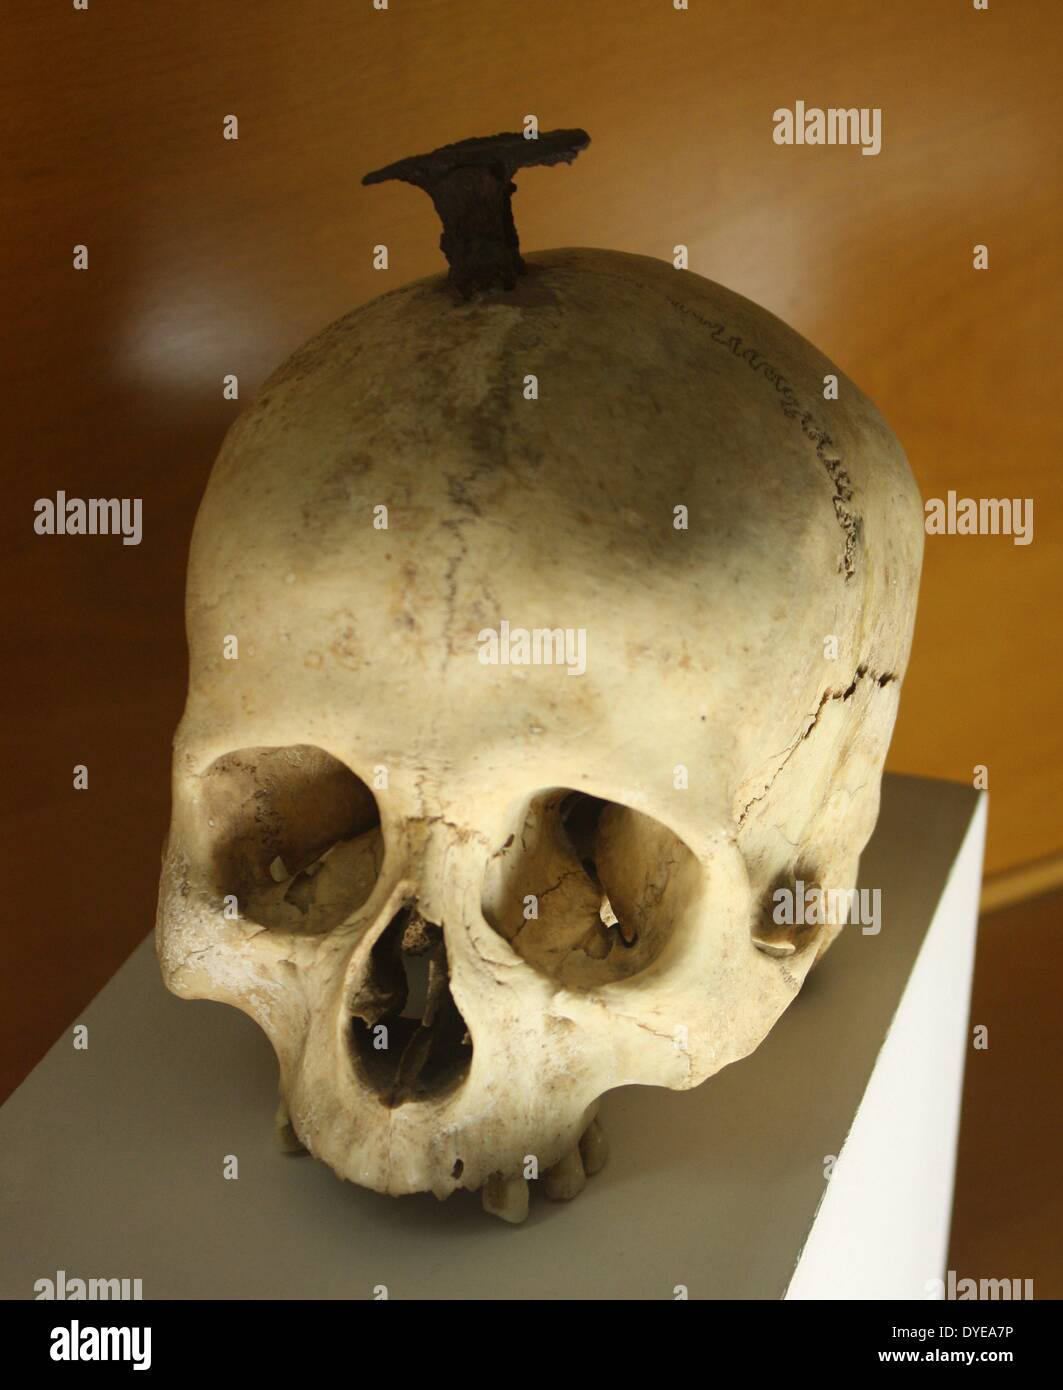 A human skull nailed post-mortem as part of a religious ritual. Barcelona. Spain 2013 Stock Photo